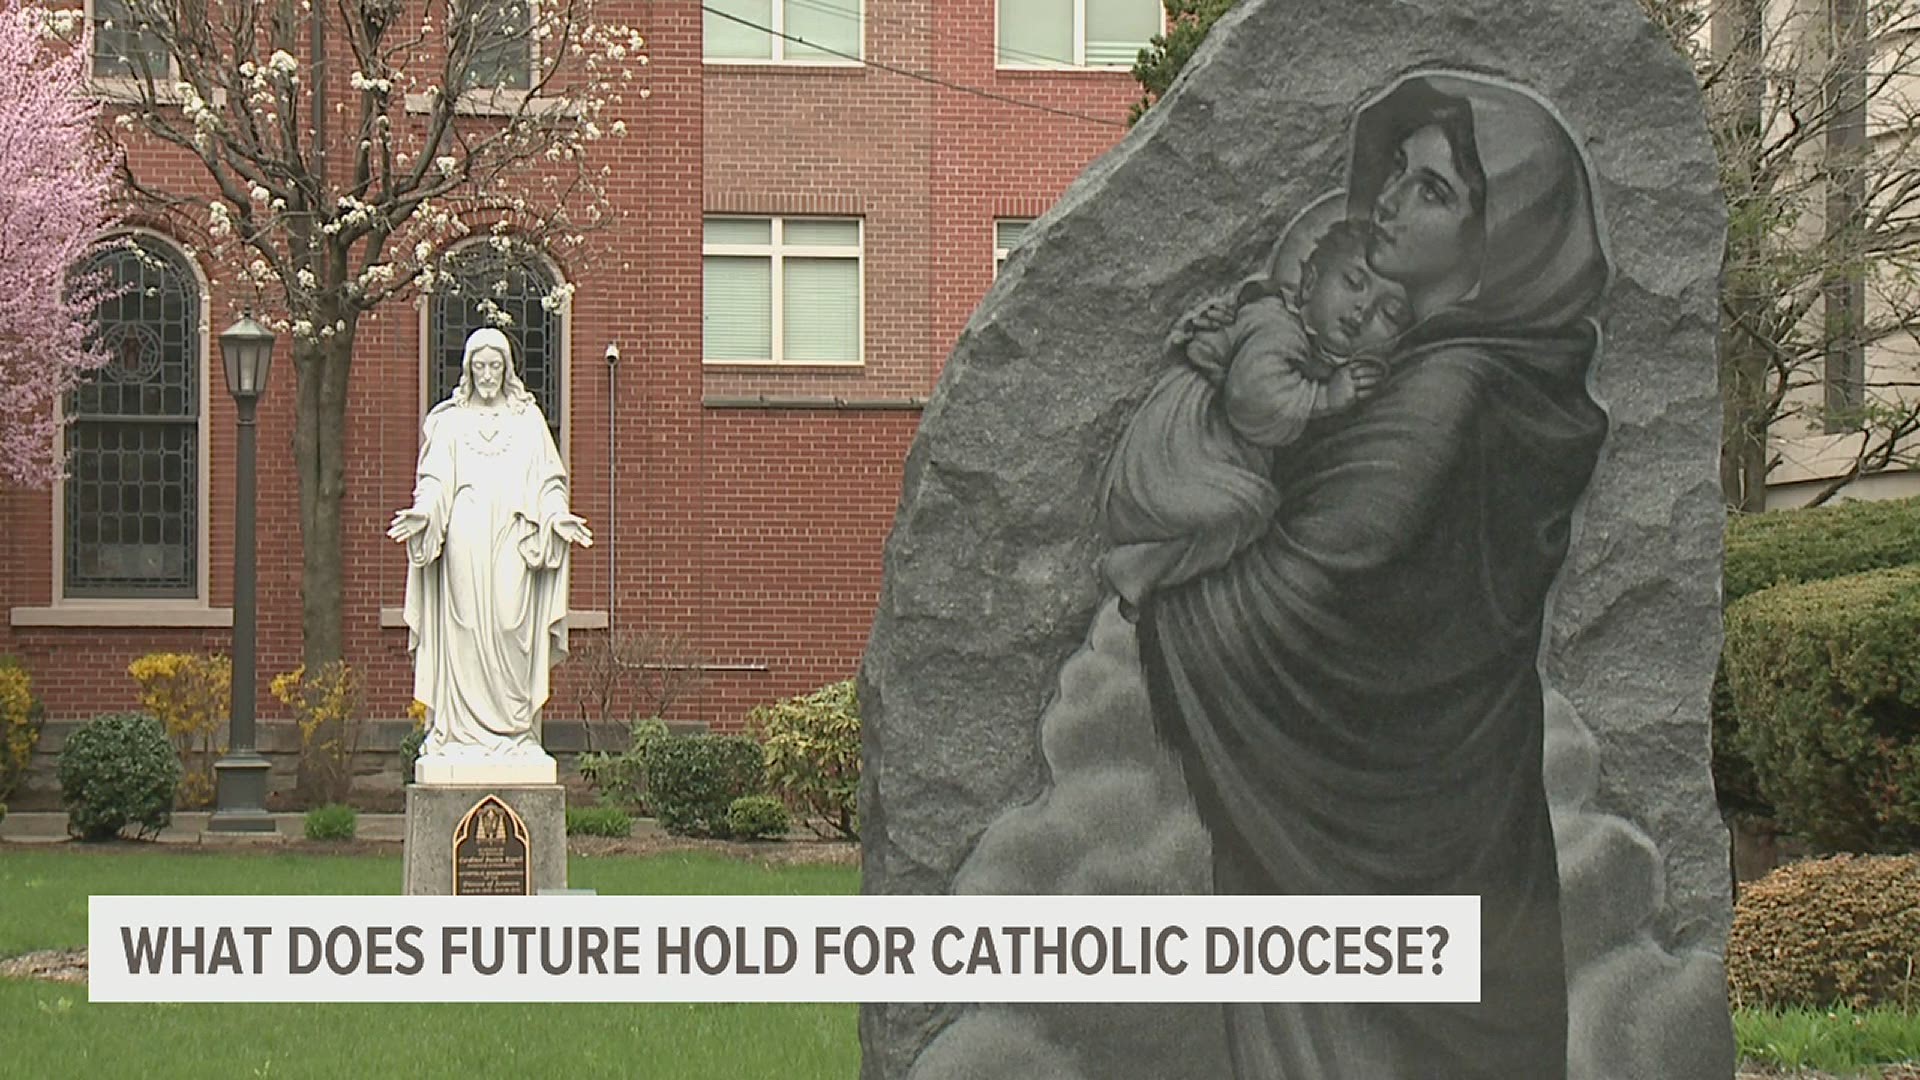 The PA Supreme Court case could determine if hundreds of cases will move forward against diocese statewide, potentially  piling on legal costs